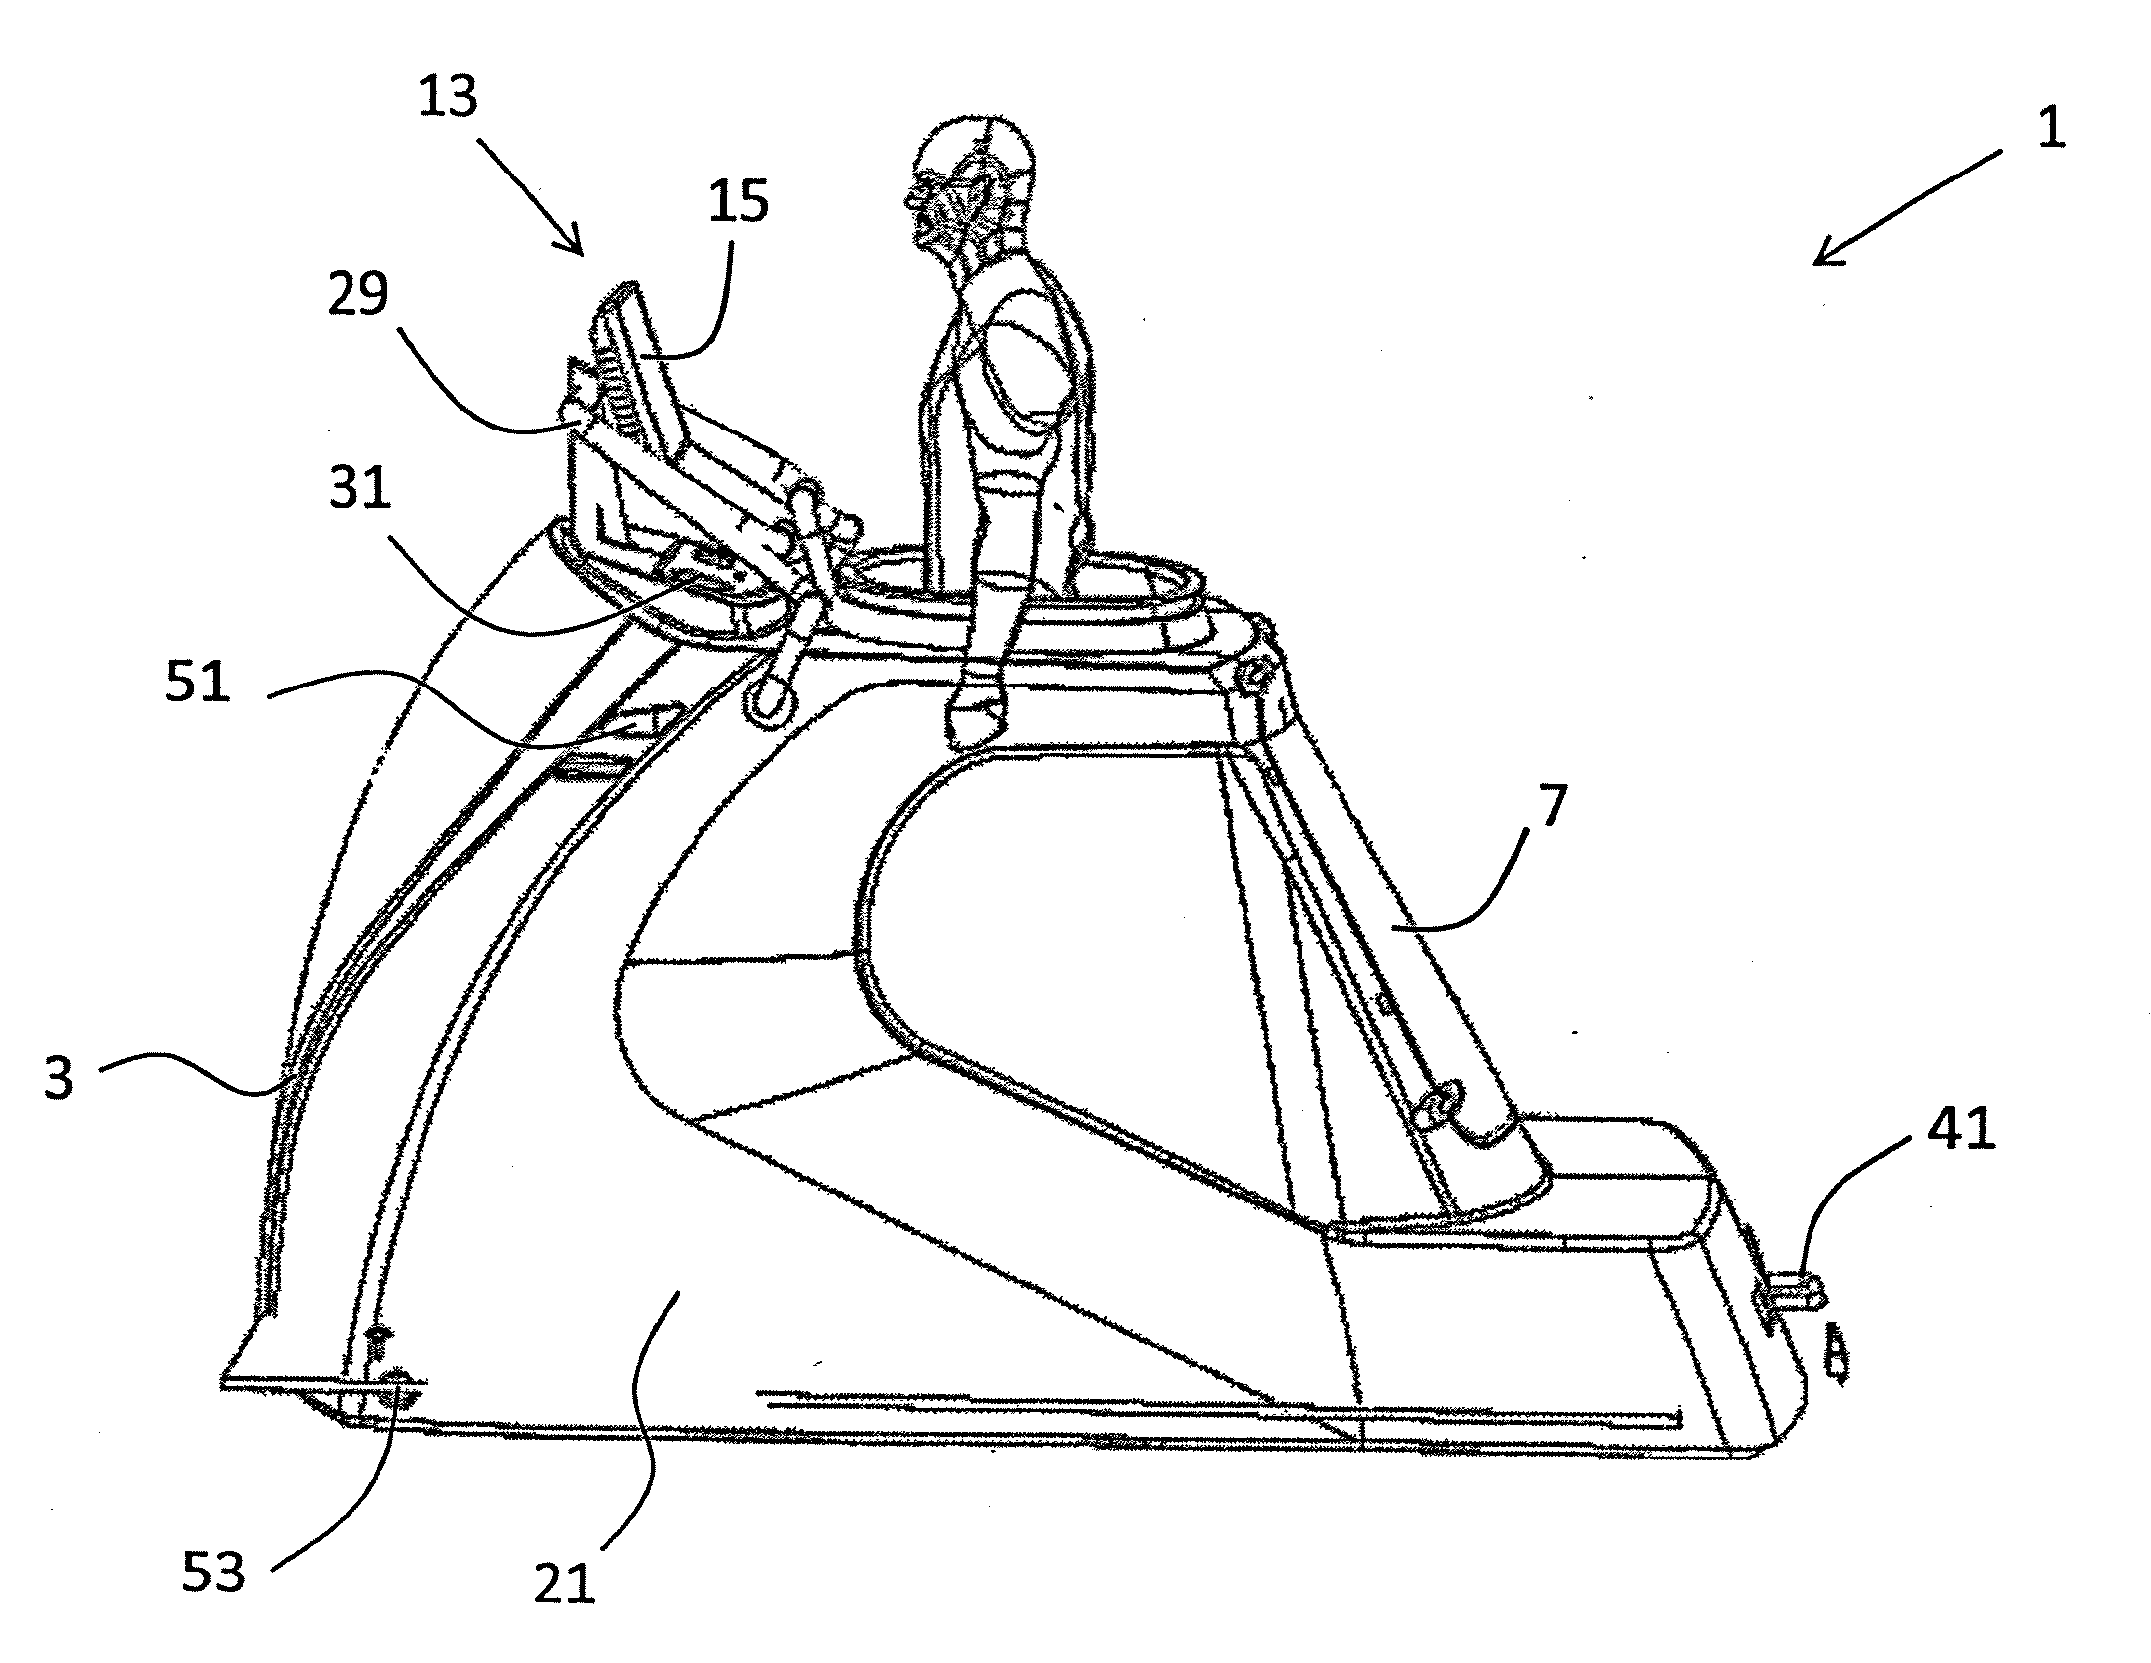 Exercise device